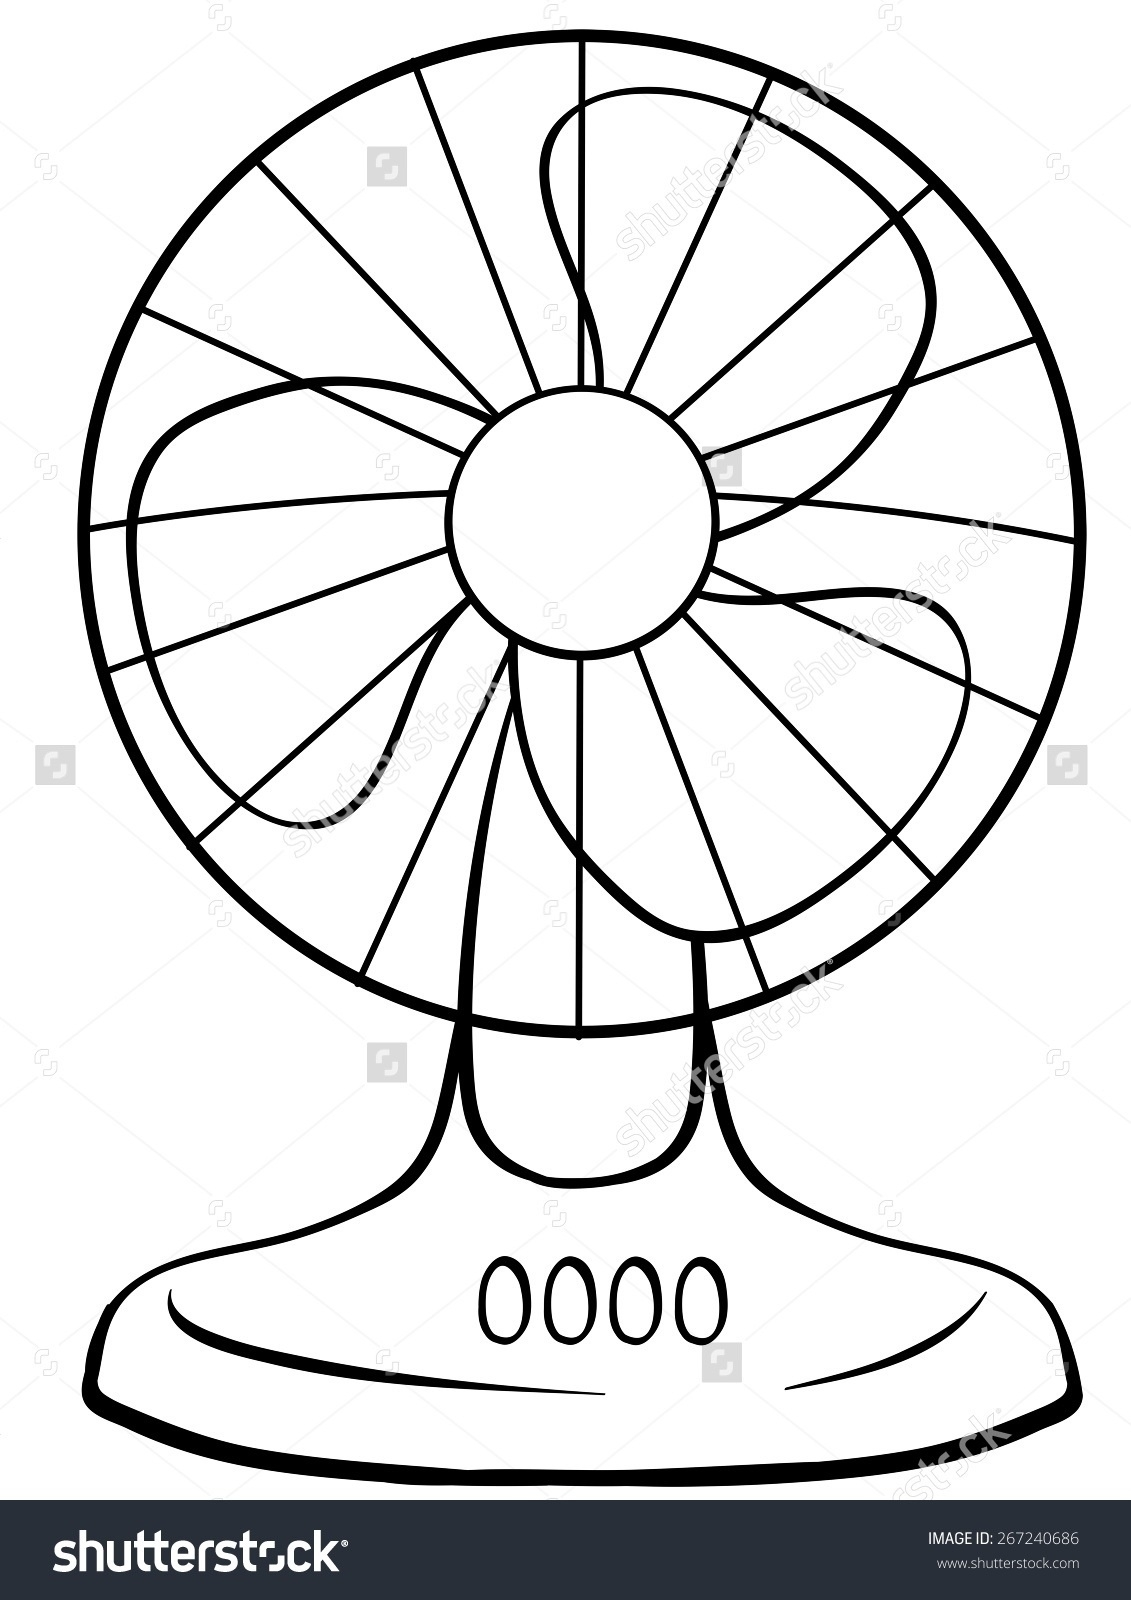 fan-clipart-black-and-white-fan-black-and-white-transparent-free-for